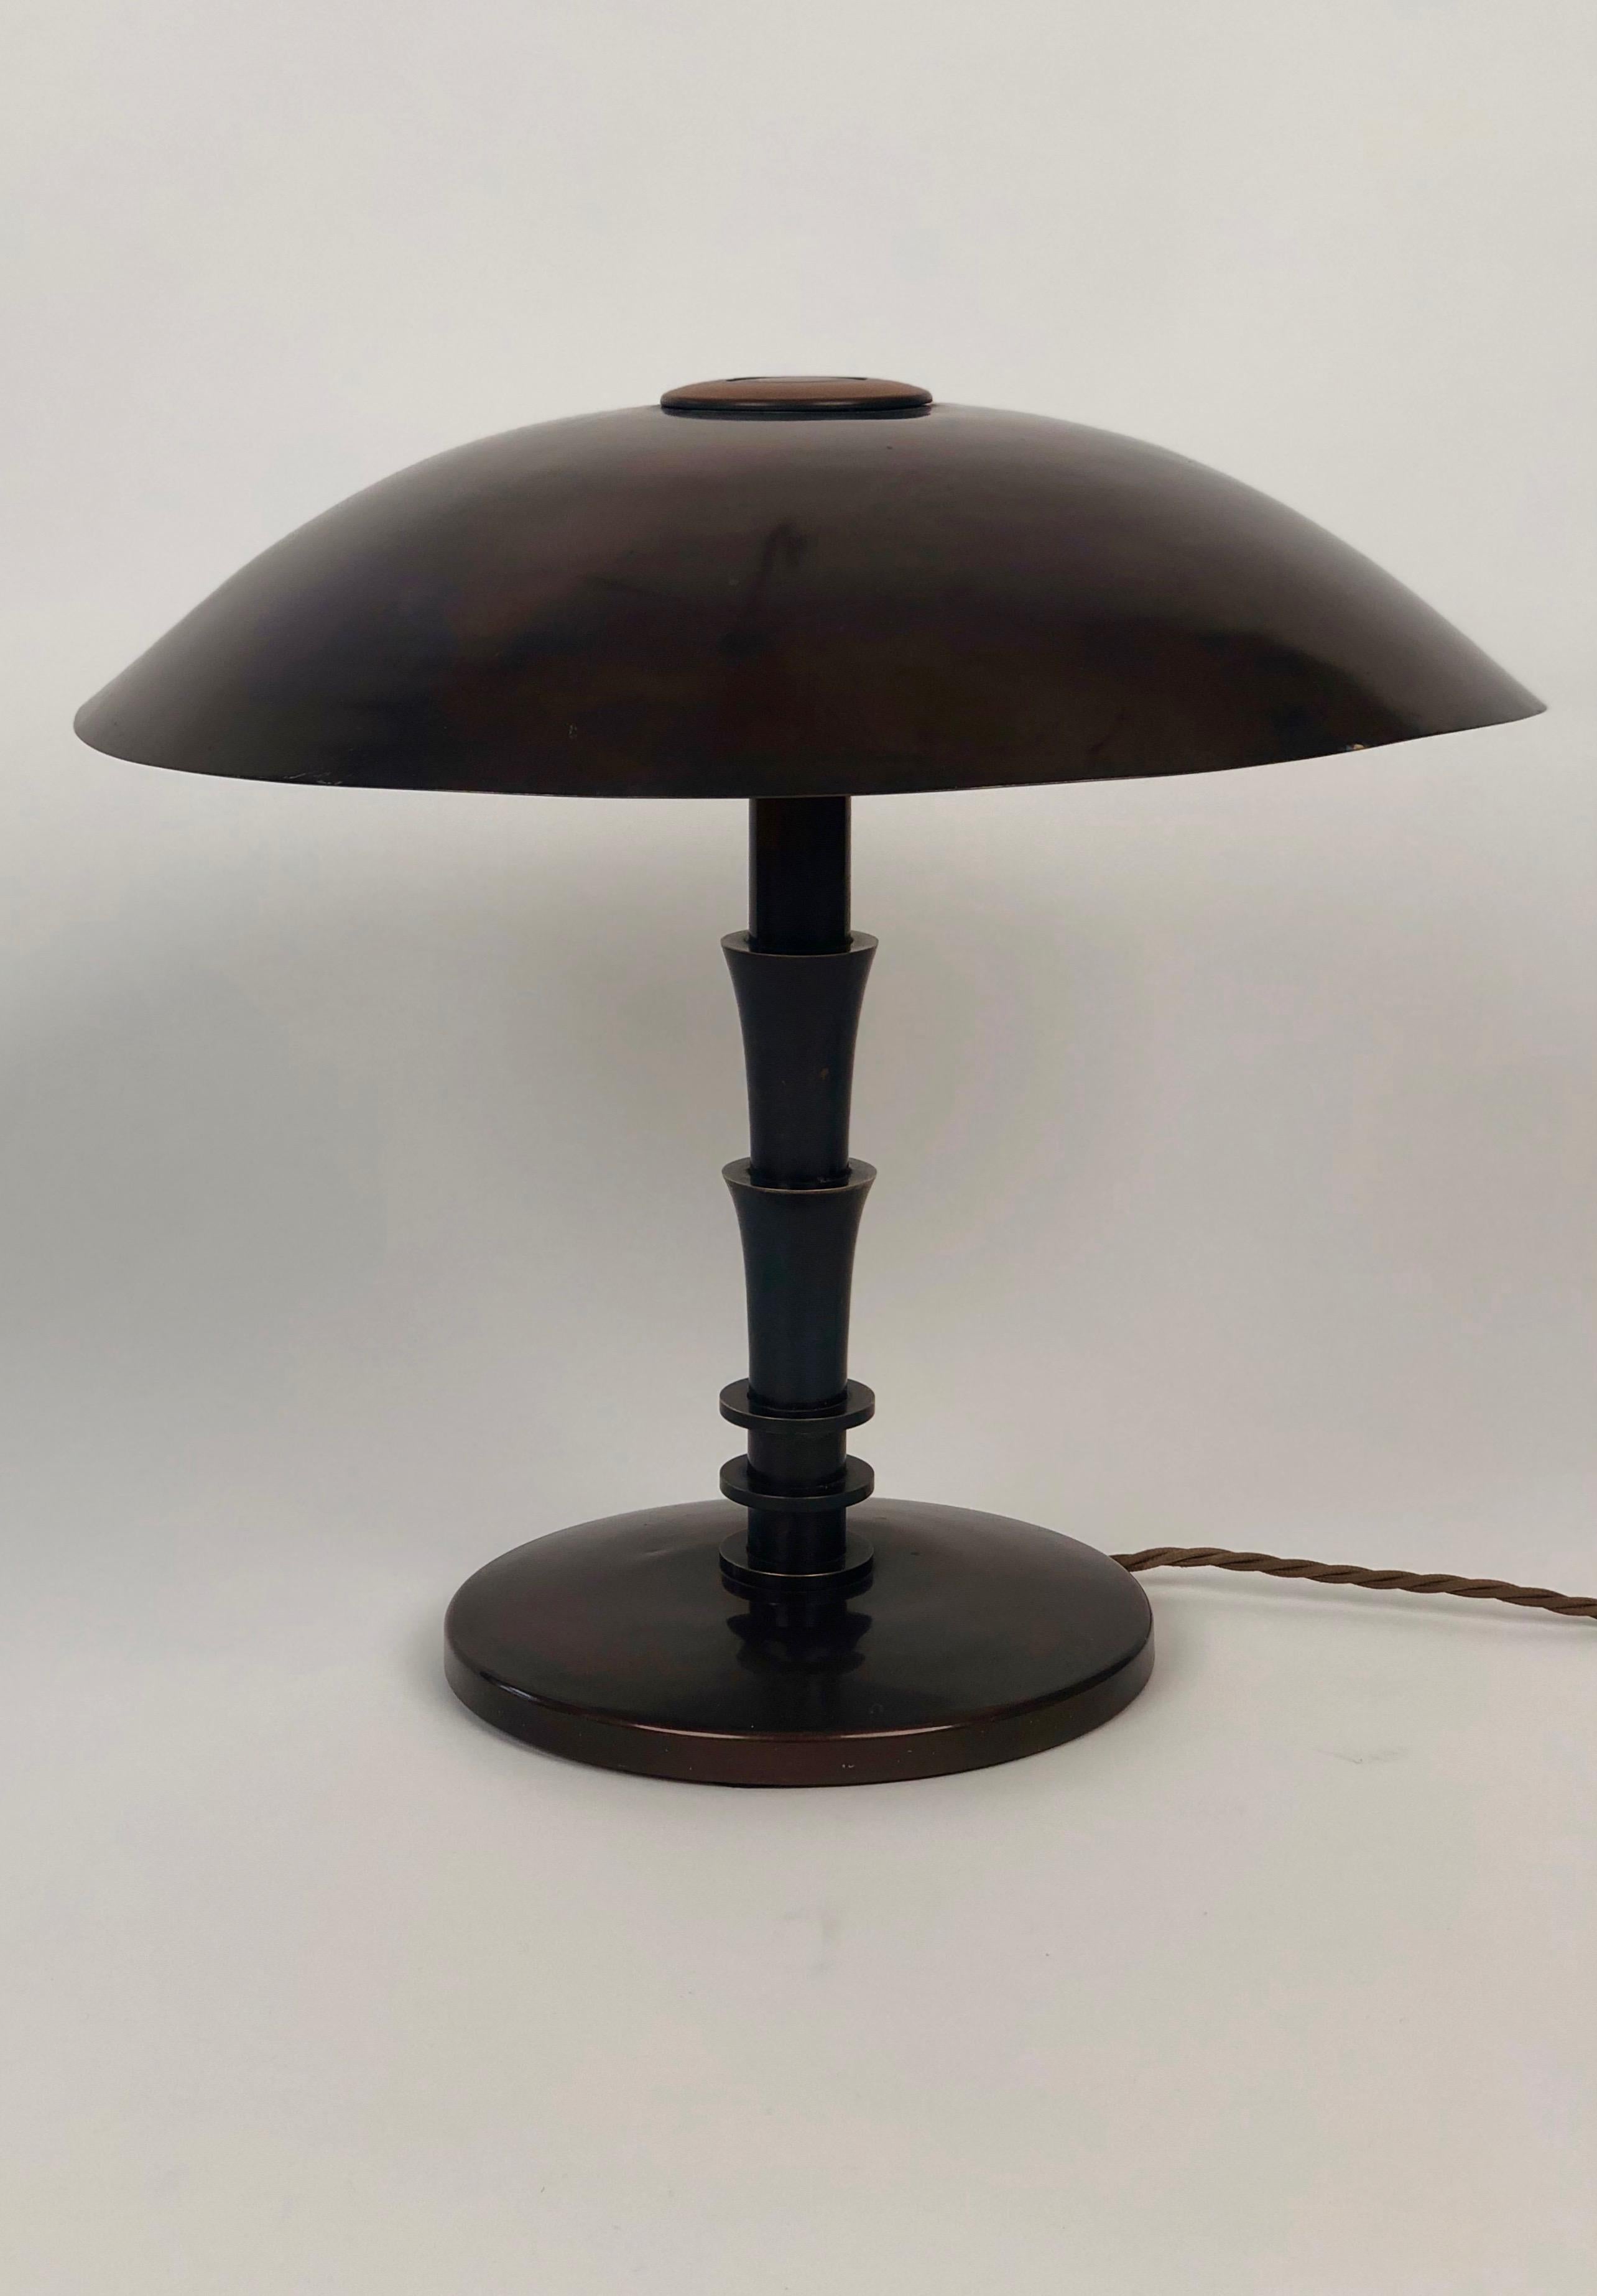 A hand made Art Deco table lamp in a geometric style from brass , 1930's , Vienna.

The form of the  base has rounded edges that contrast to the geometric, step like stem
the overall effect with the bronze patia is one of elegance.

Special to this